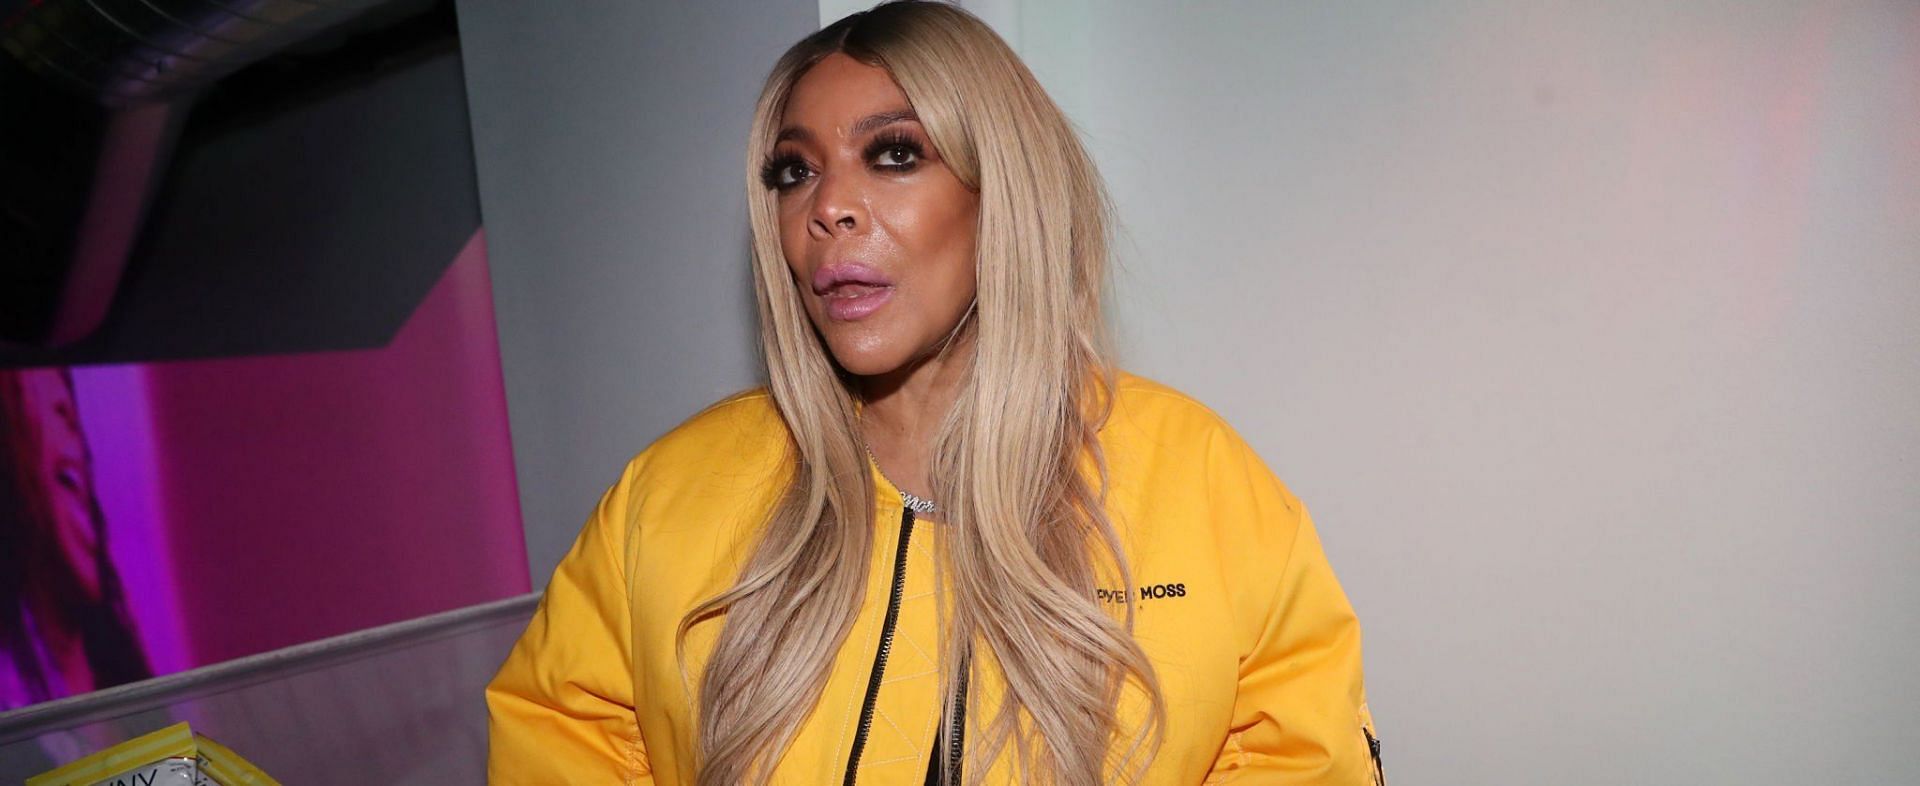 Wendy Williams went on a break to focus on her health issues (Image via Johnny Nunez/WireImage)